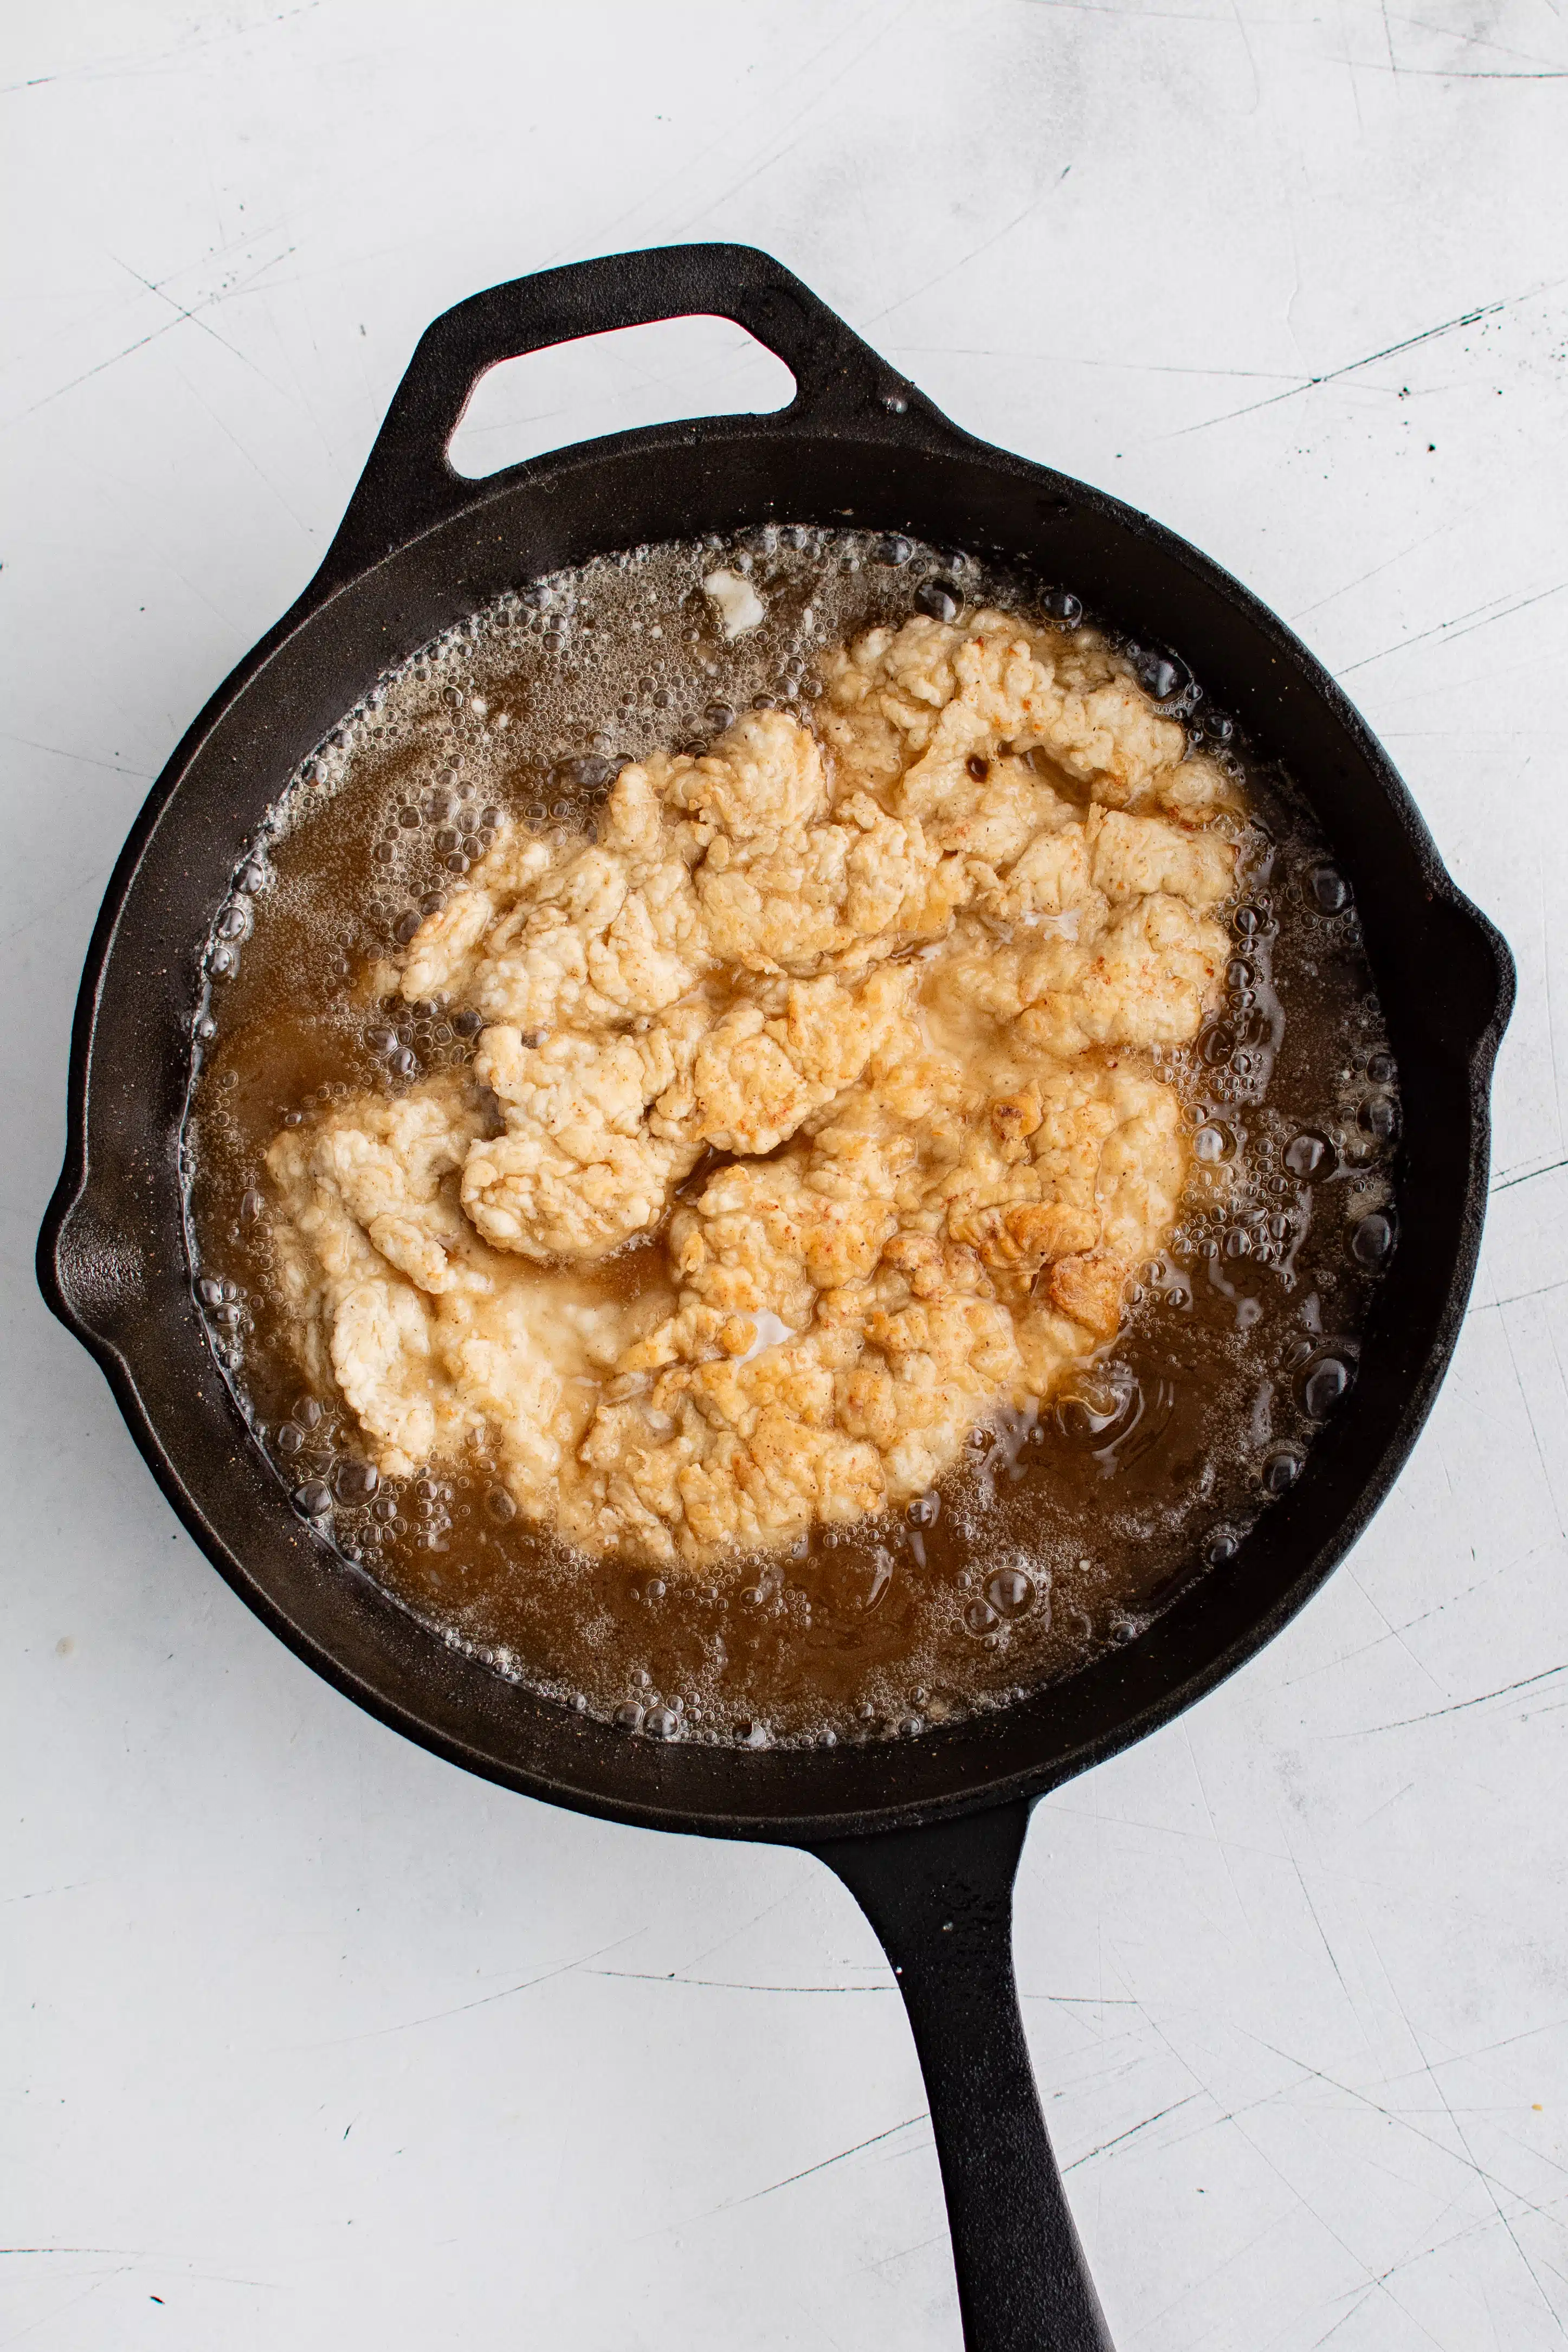 Breaded chicken breast pan-frying in a large skillet filled with vegetable oil.